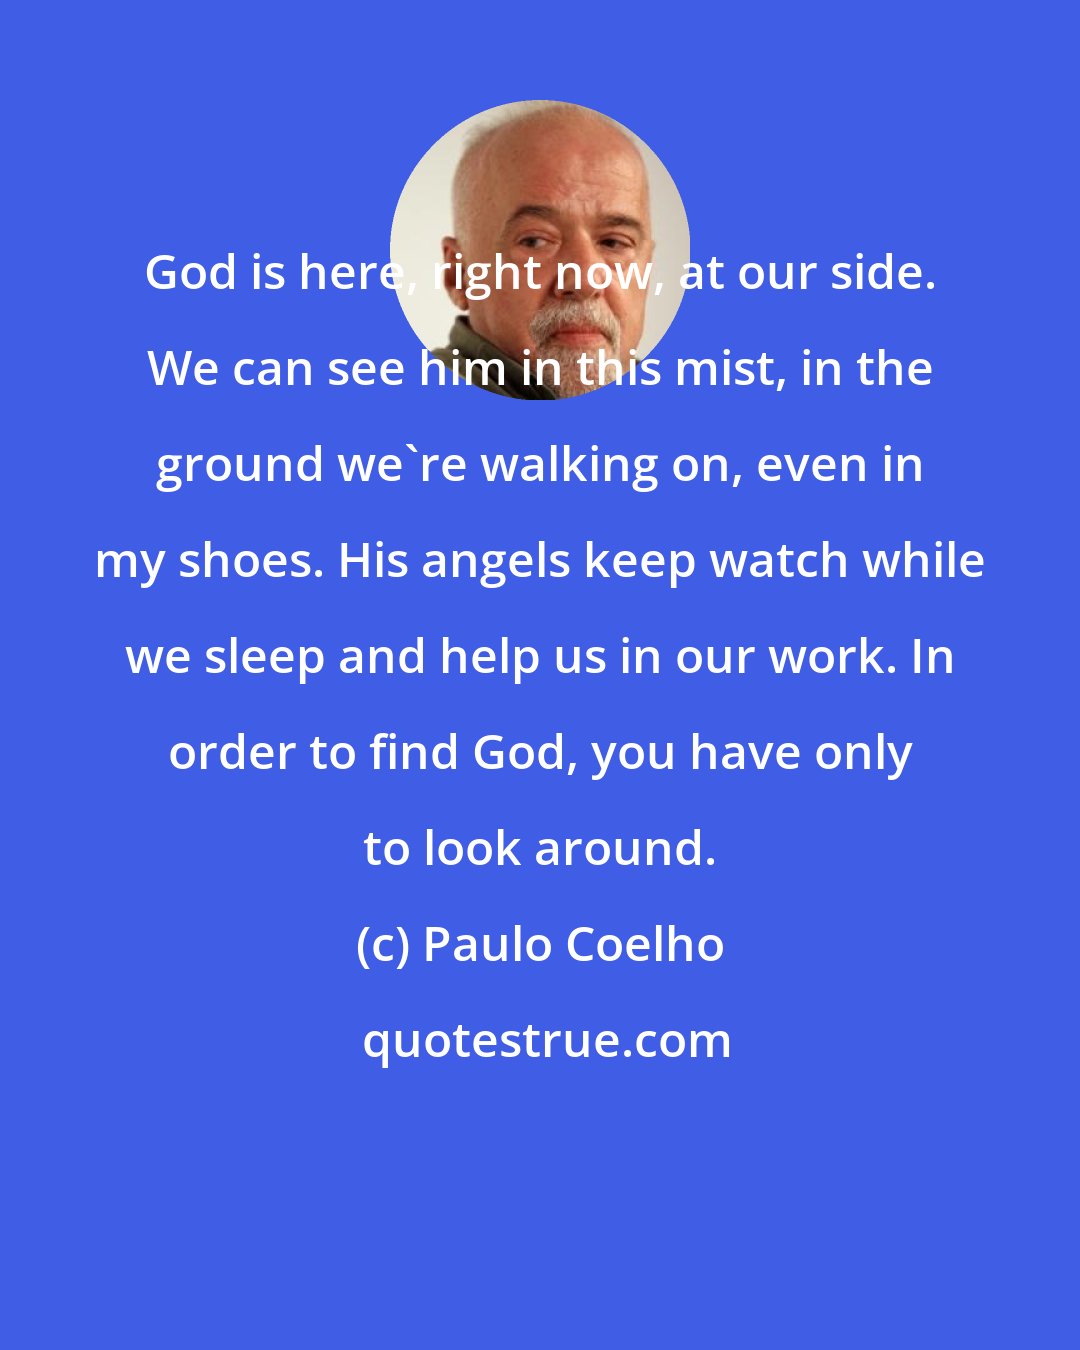 Paulo Coelho: God is here, right now, at our side. We can see him in this mist, in the ground we're walking on, even in my shoes. His angels keep watch while we sleep and help us in our work. In order to find God, you have only to look around.